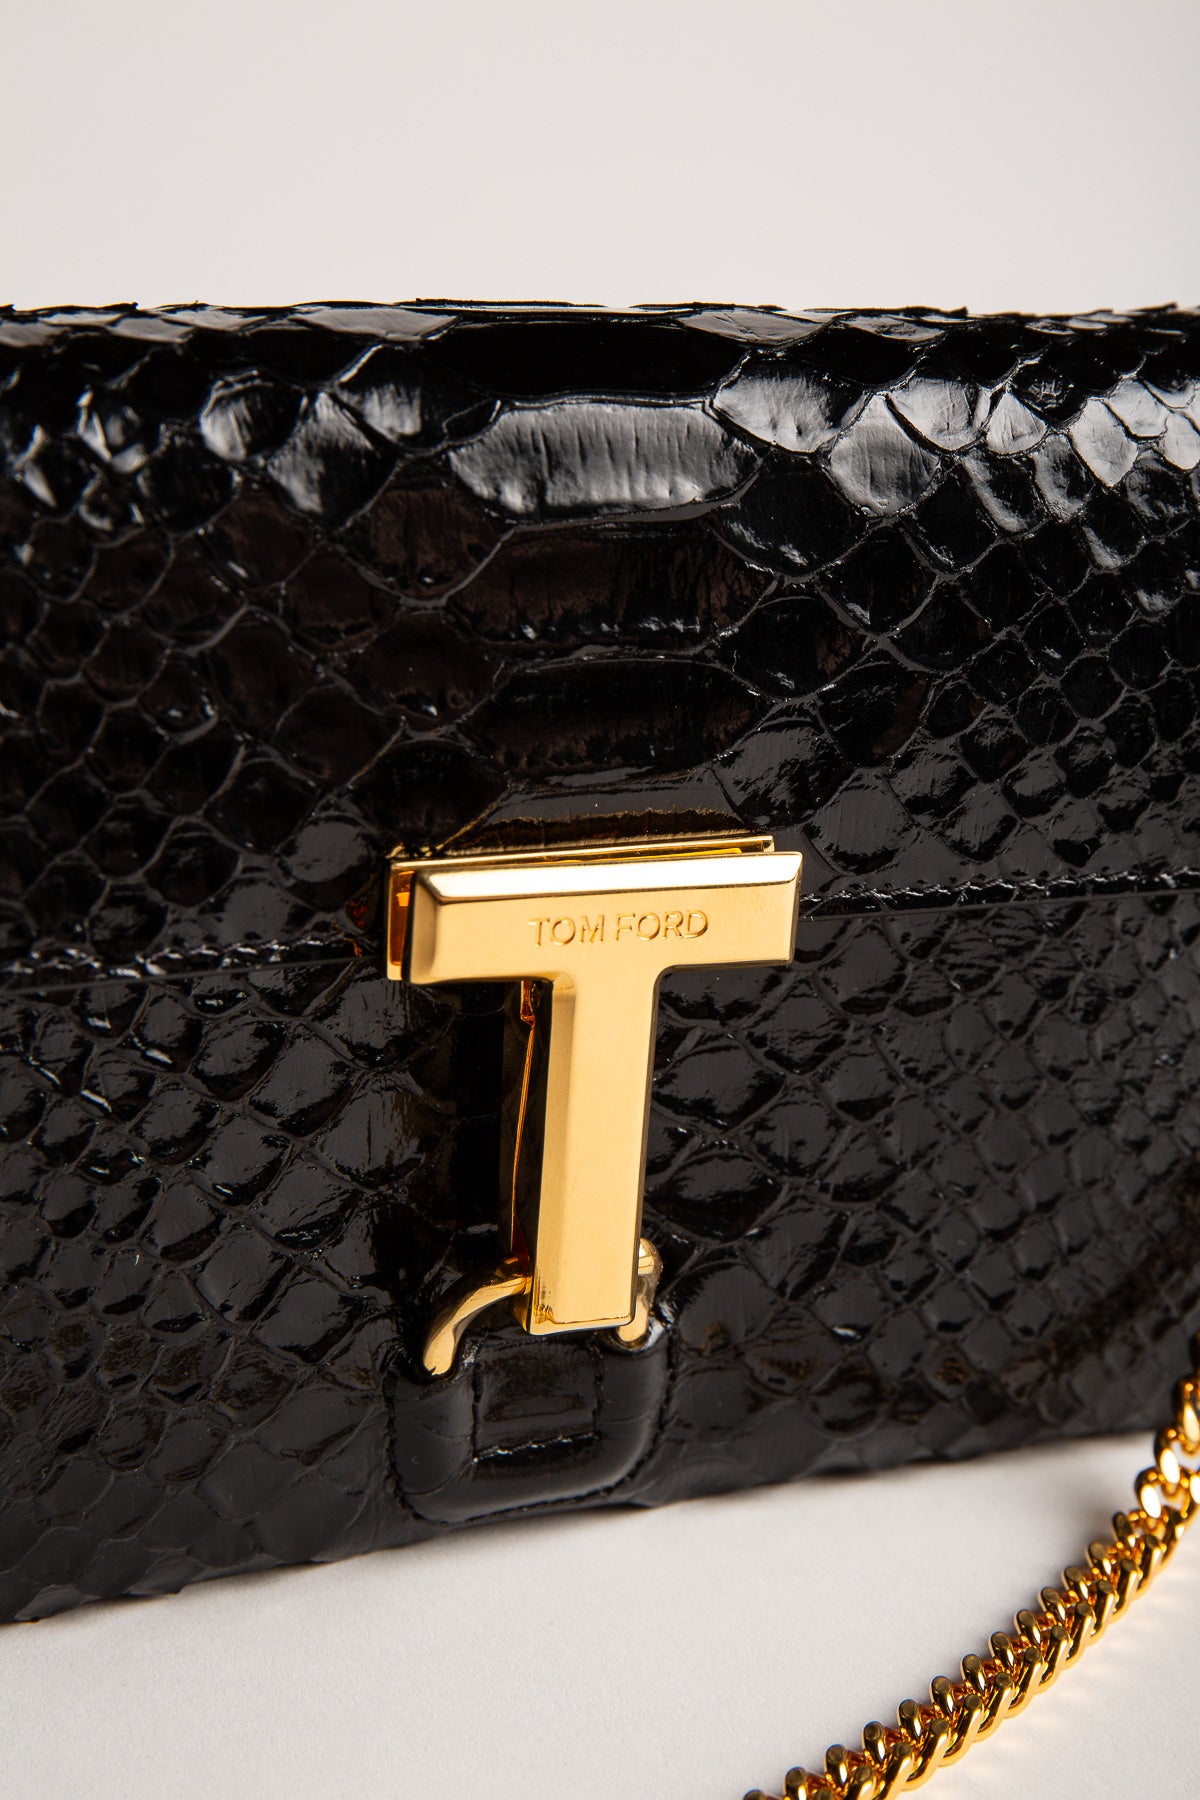 TOM FORD | GLOSSY STAMPED PYTHON LEATHER MONARCH MINI BAG